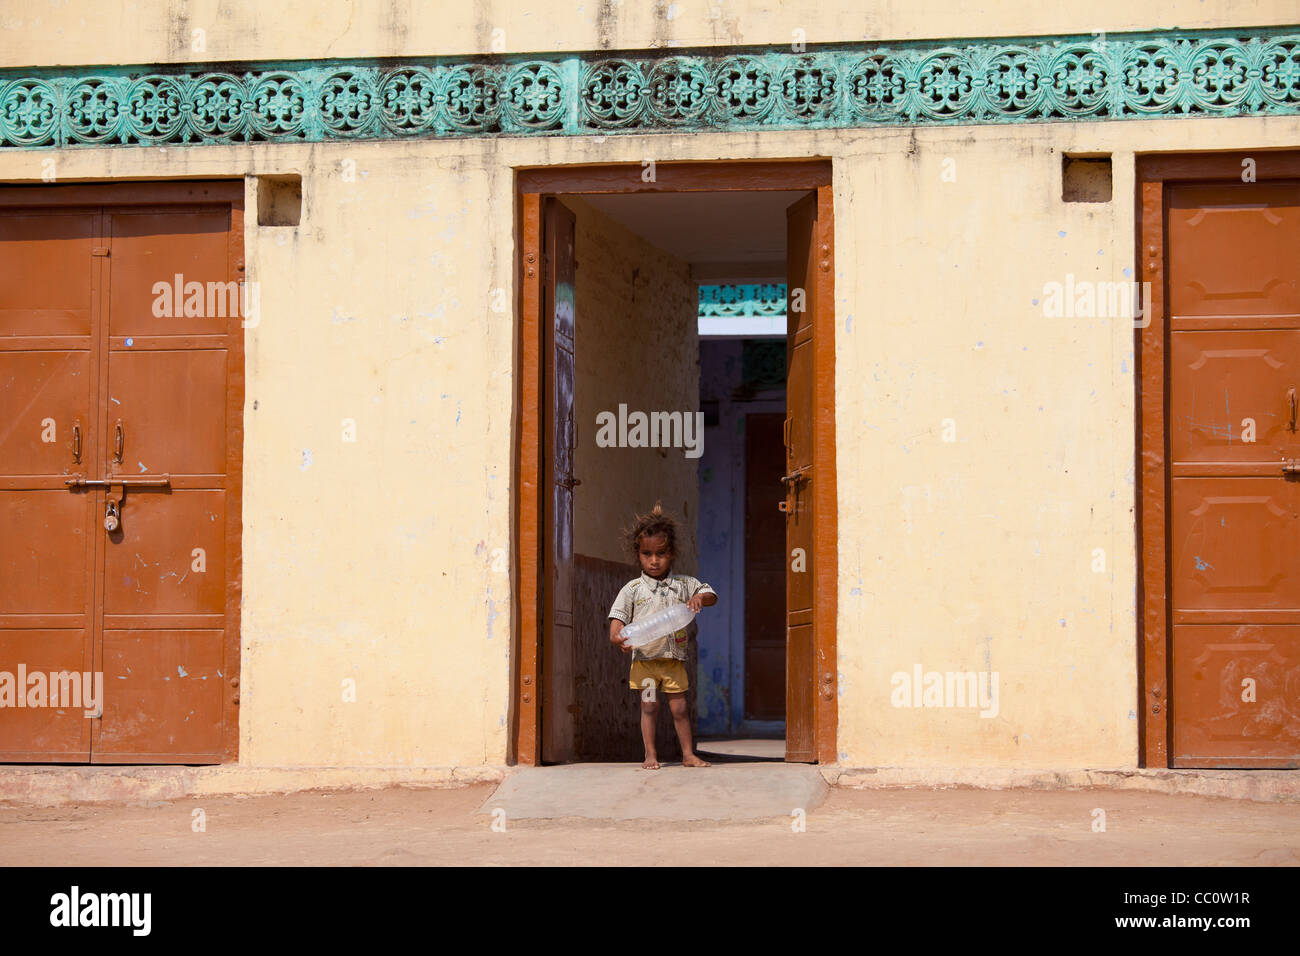 Bambino indiano a casa in Sawai Madhopur nel Rajasthan, India settentrionale Foto Stock